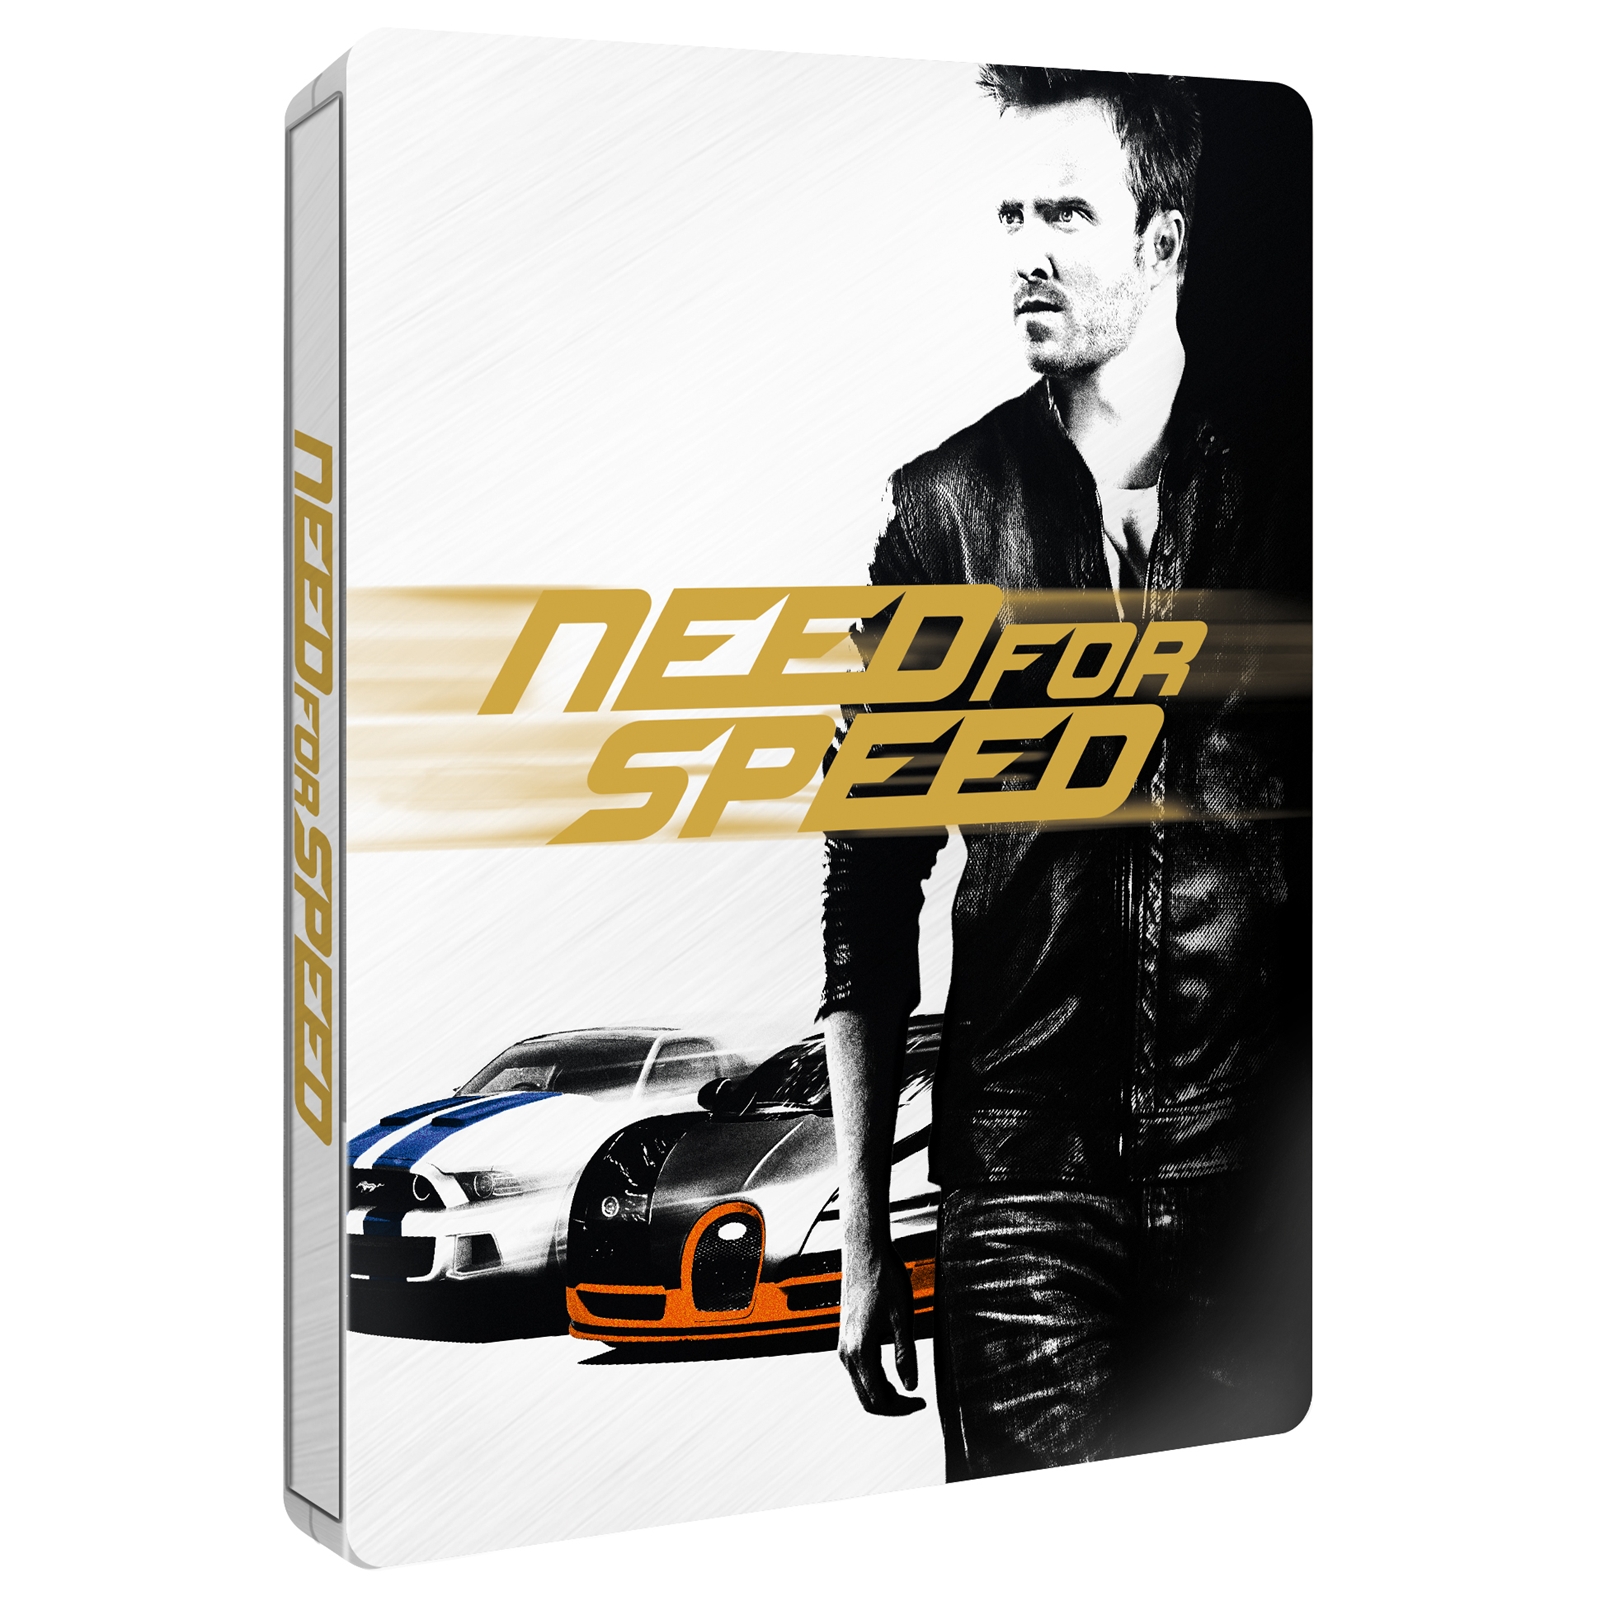 High octane thriller "Need for Speed" is heading to Steelbook wit...